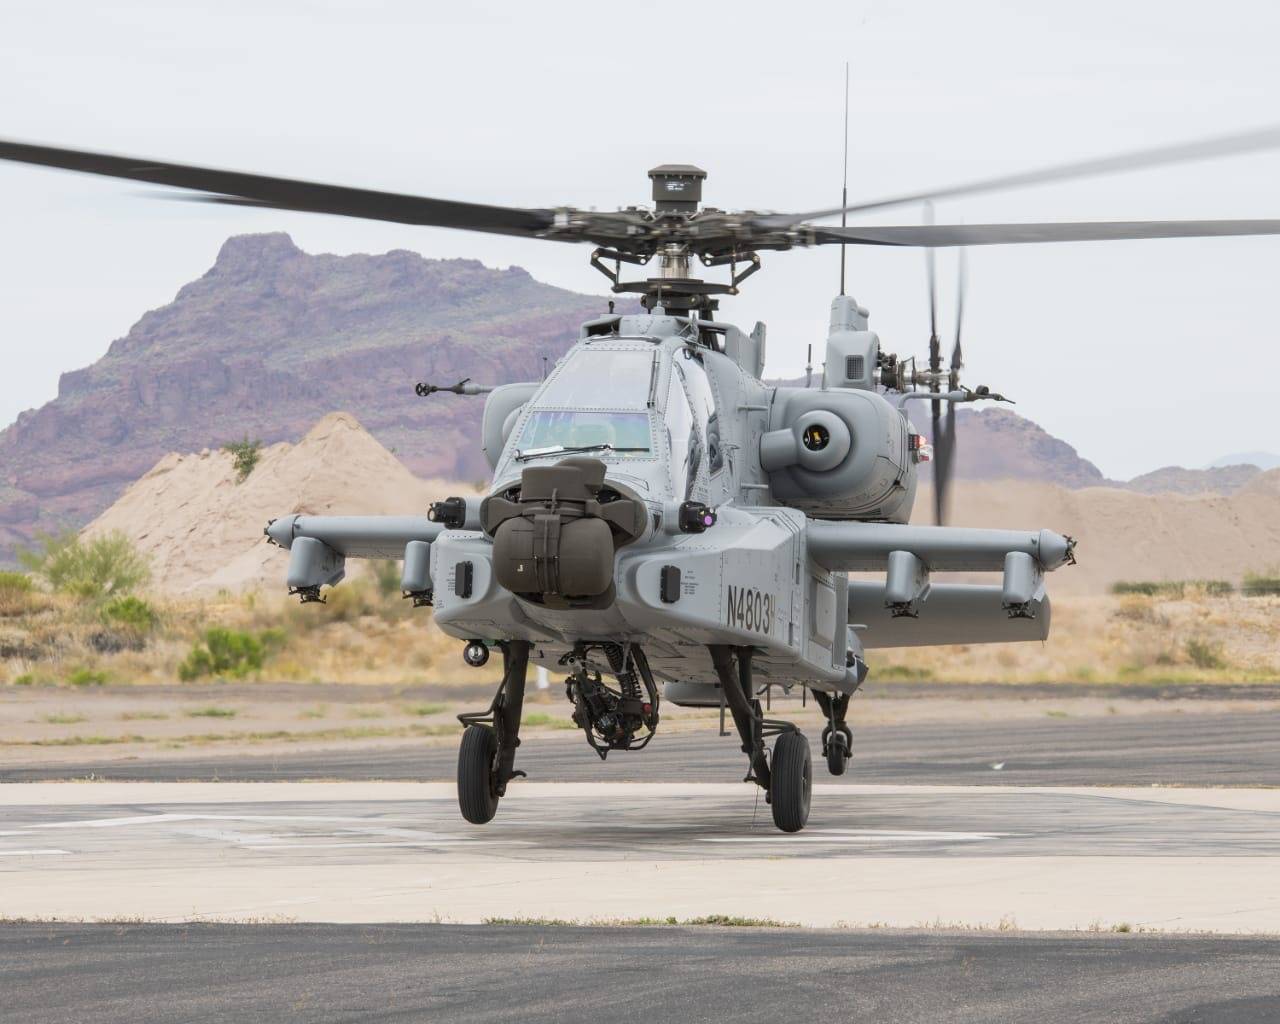 The Apache deal is basically a follow-on order to the 22 such choppers already inducted by IAF under a Rs 13,952 crore deal with the US in 2015